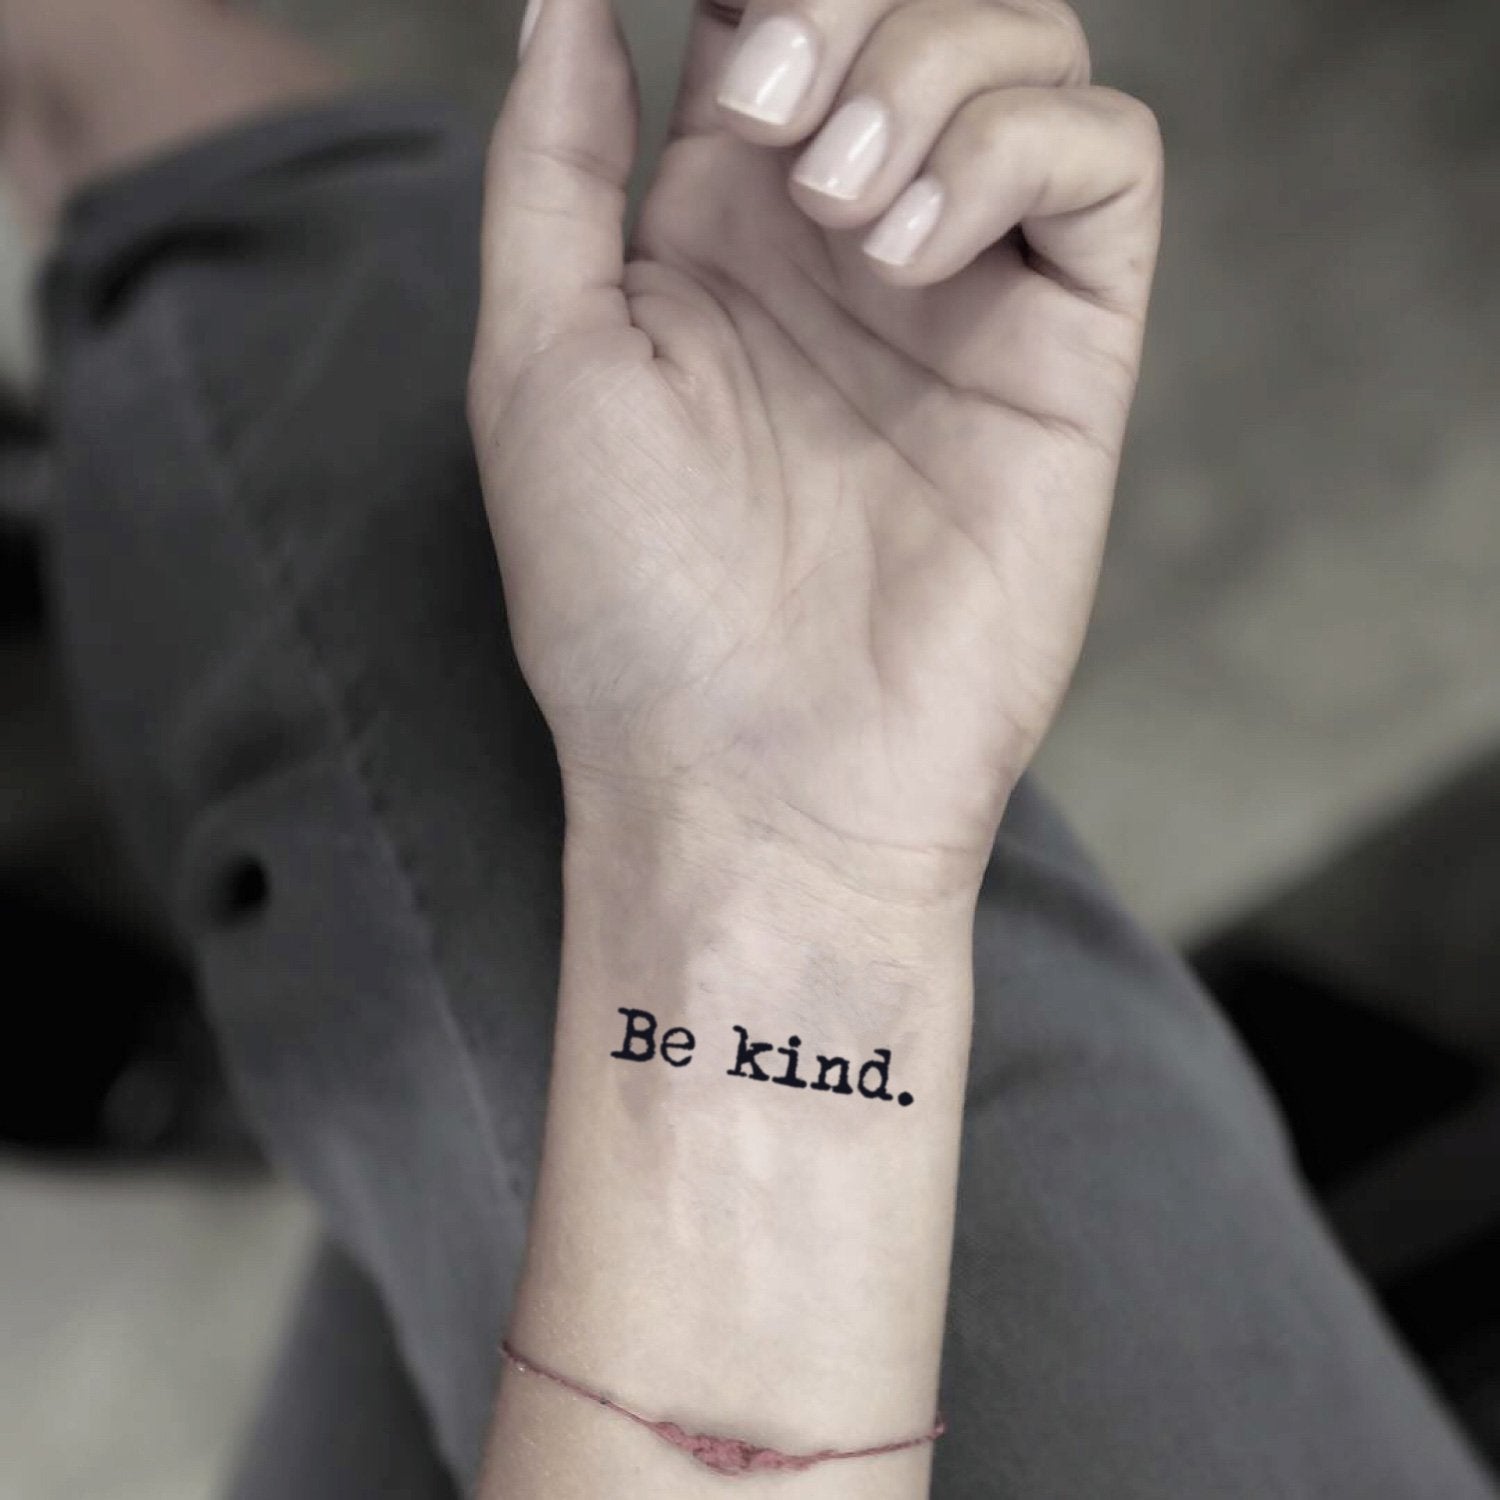 A permanent reminder ✨ Be kind ✨ Swipe for slo mo | Instagram